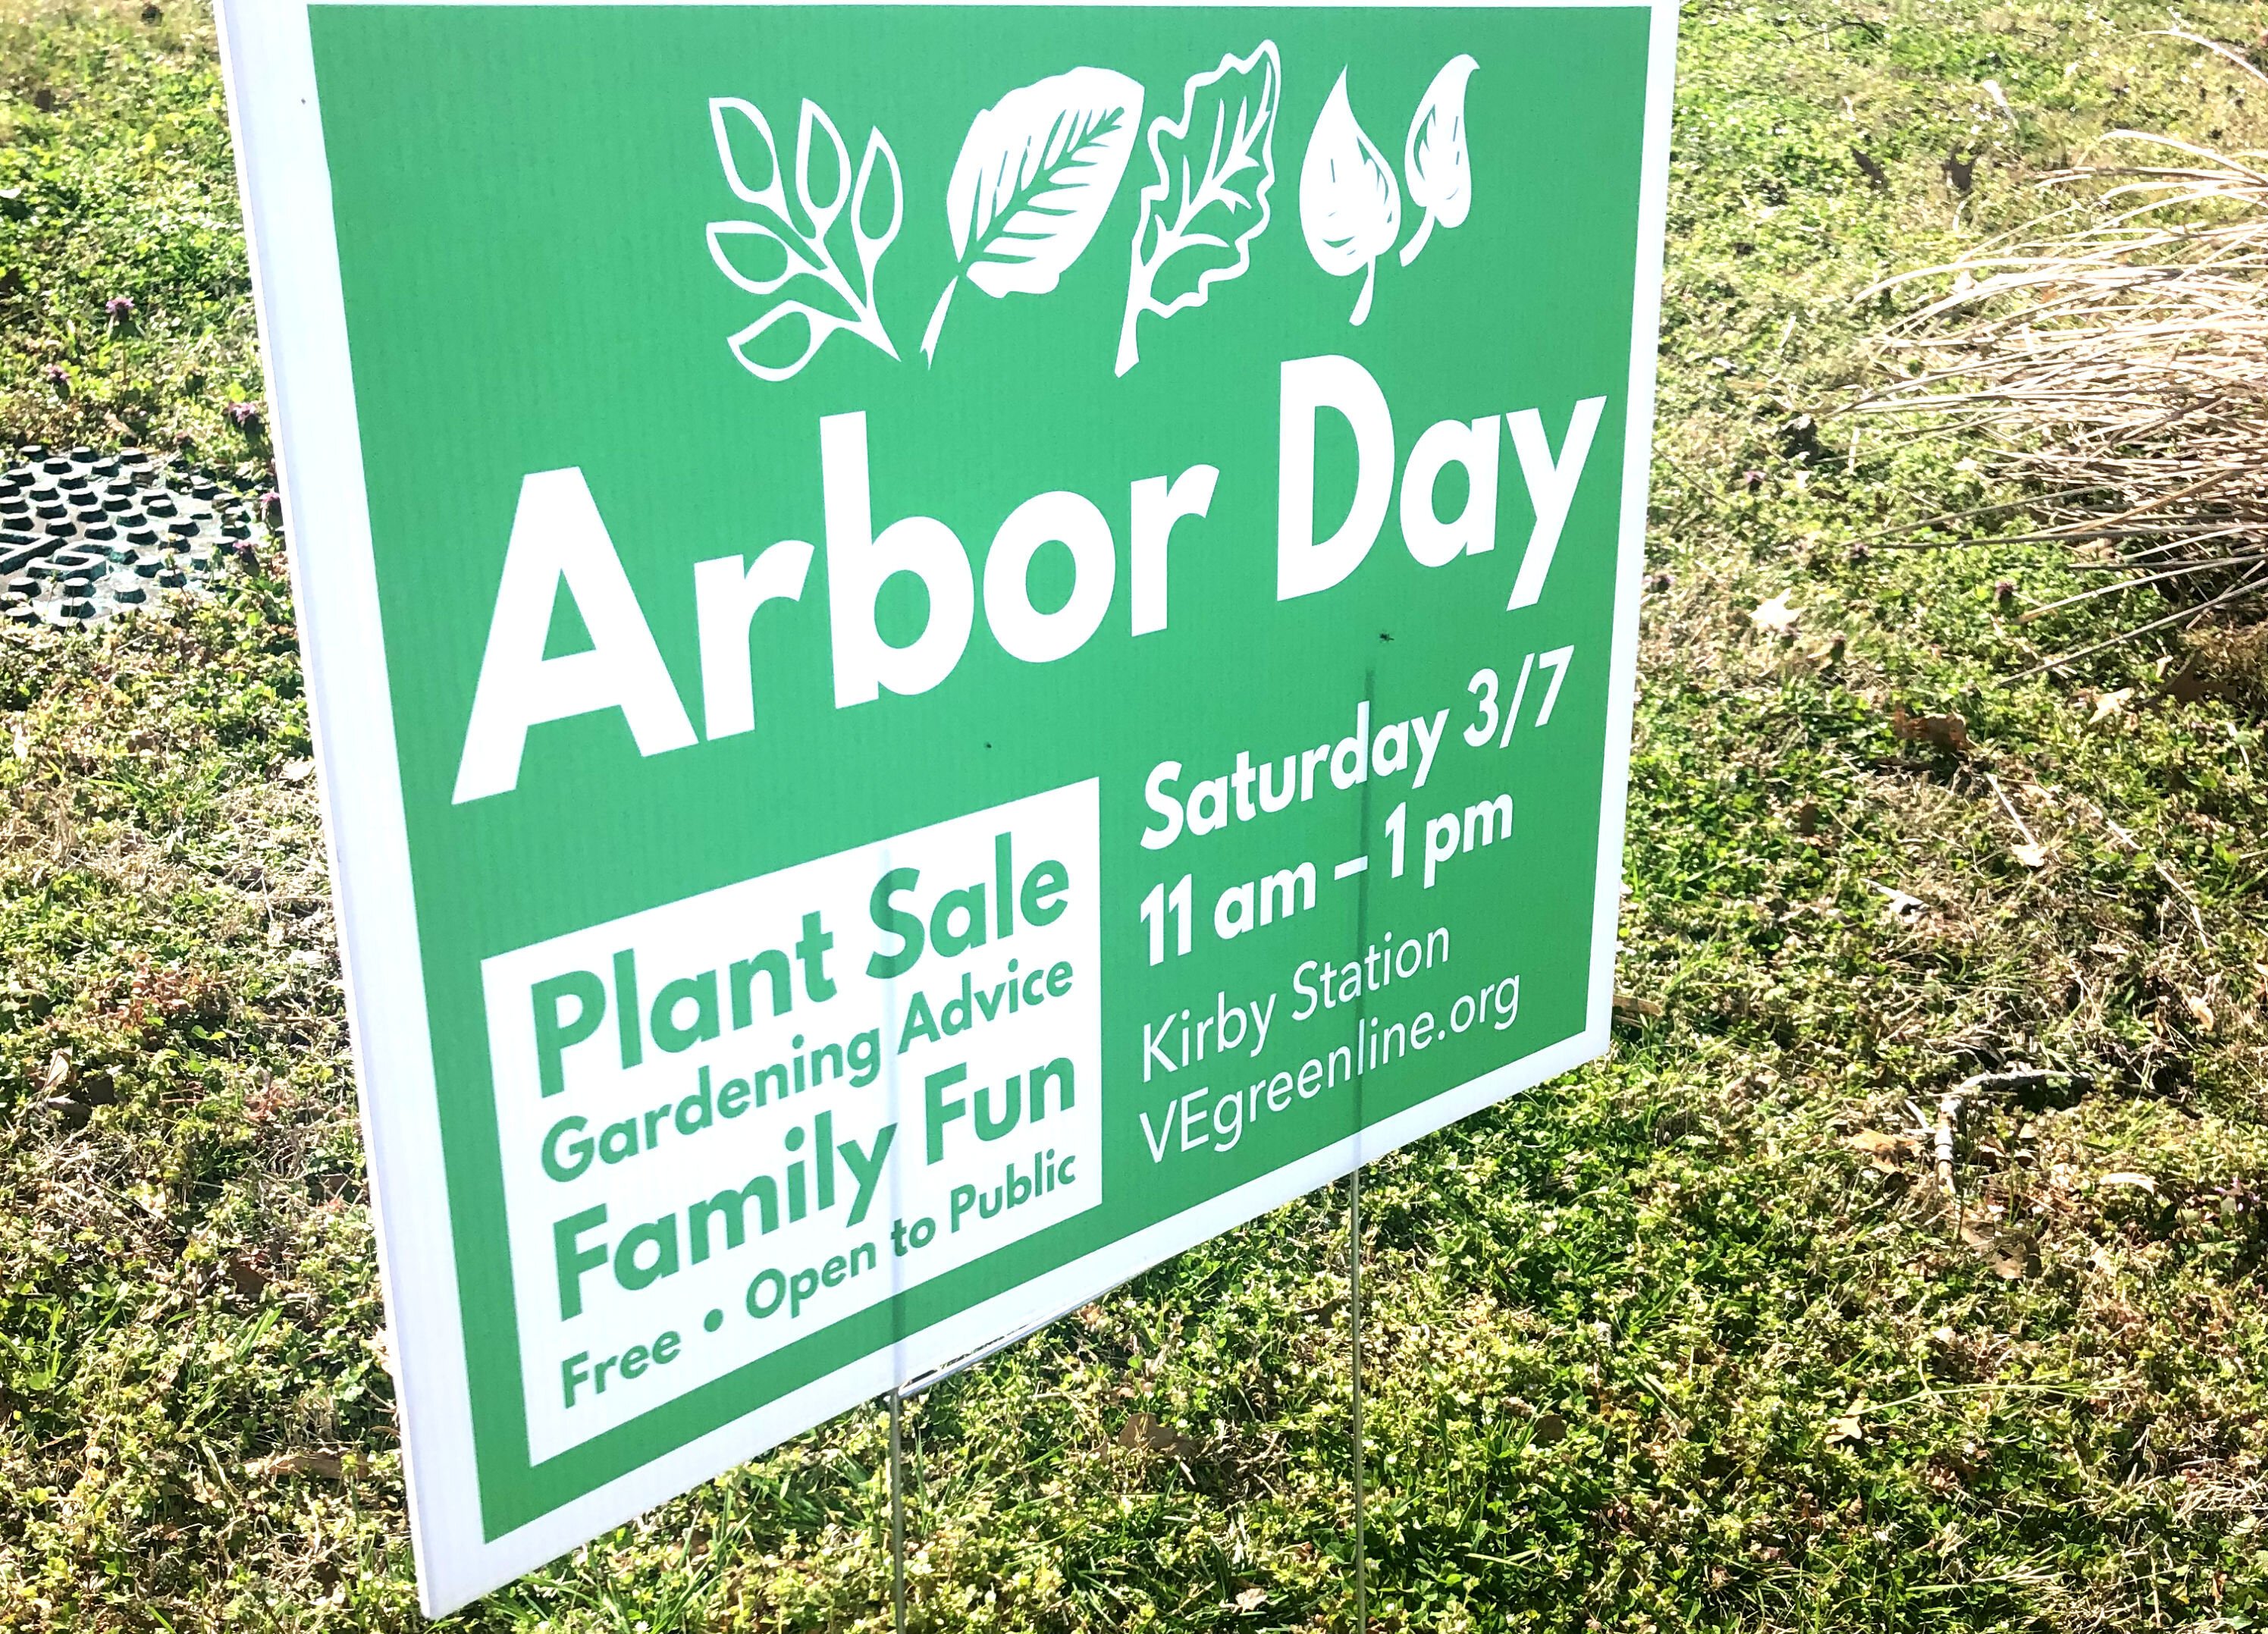 Arbor Day is a national holiday that encourages people to plant trees.This year's Arbor Day Celebration was a first for the V&E Greenline. (Ashley Davis)